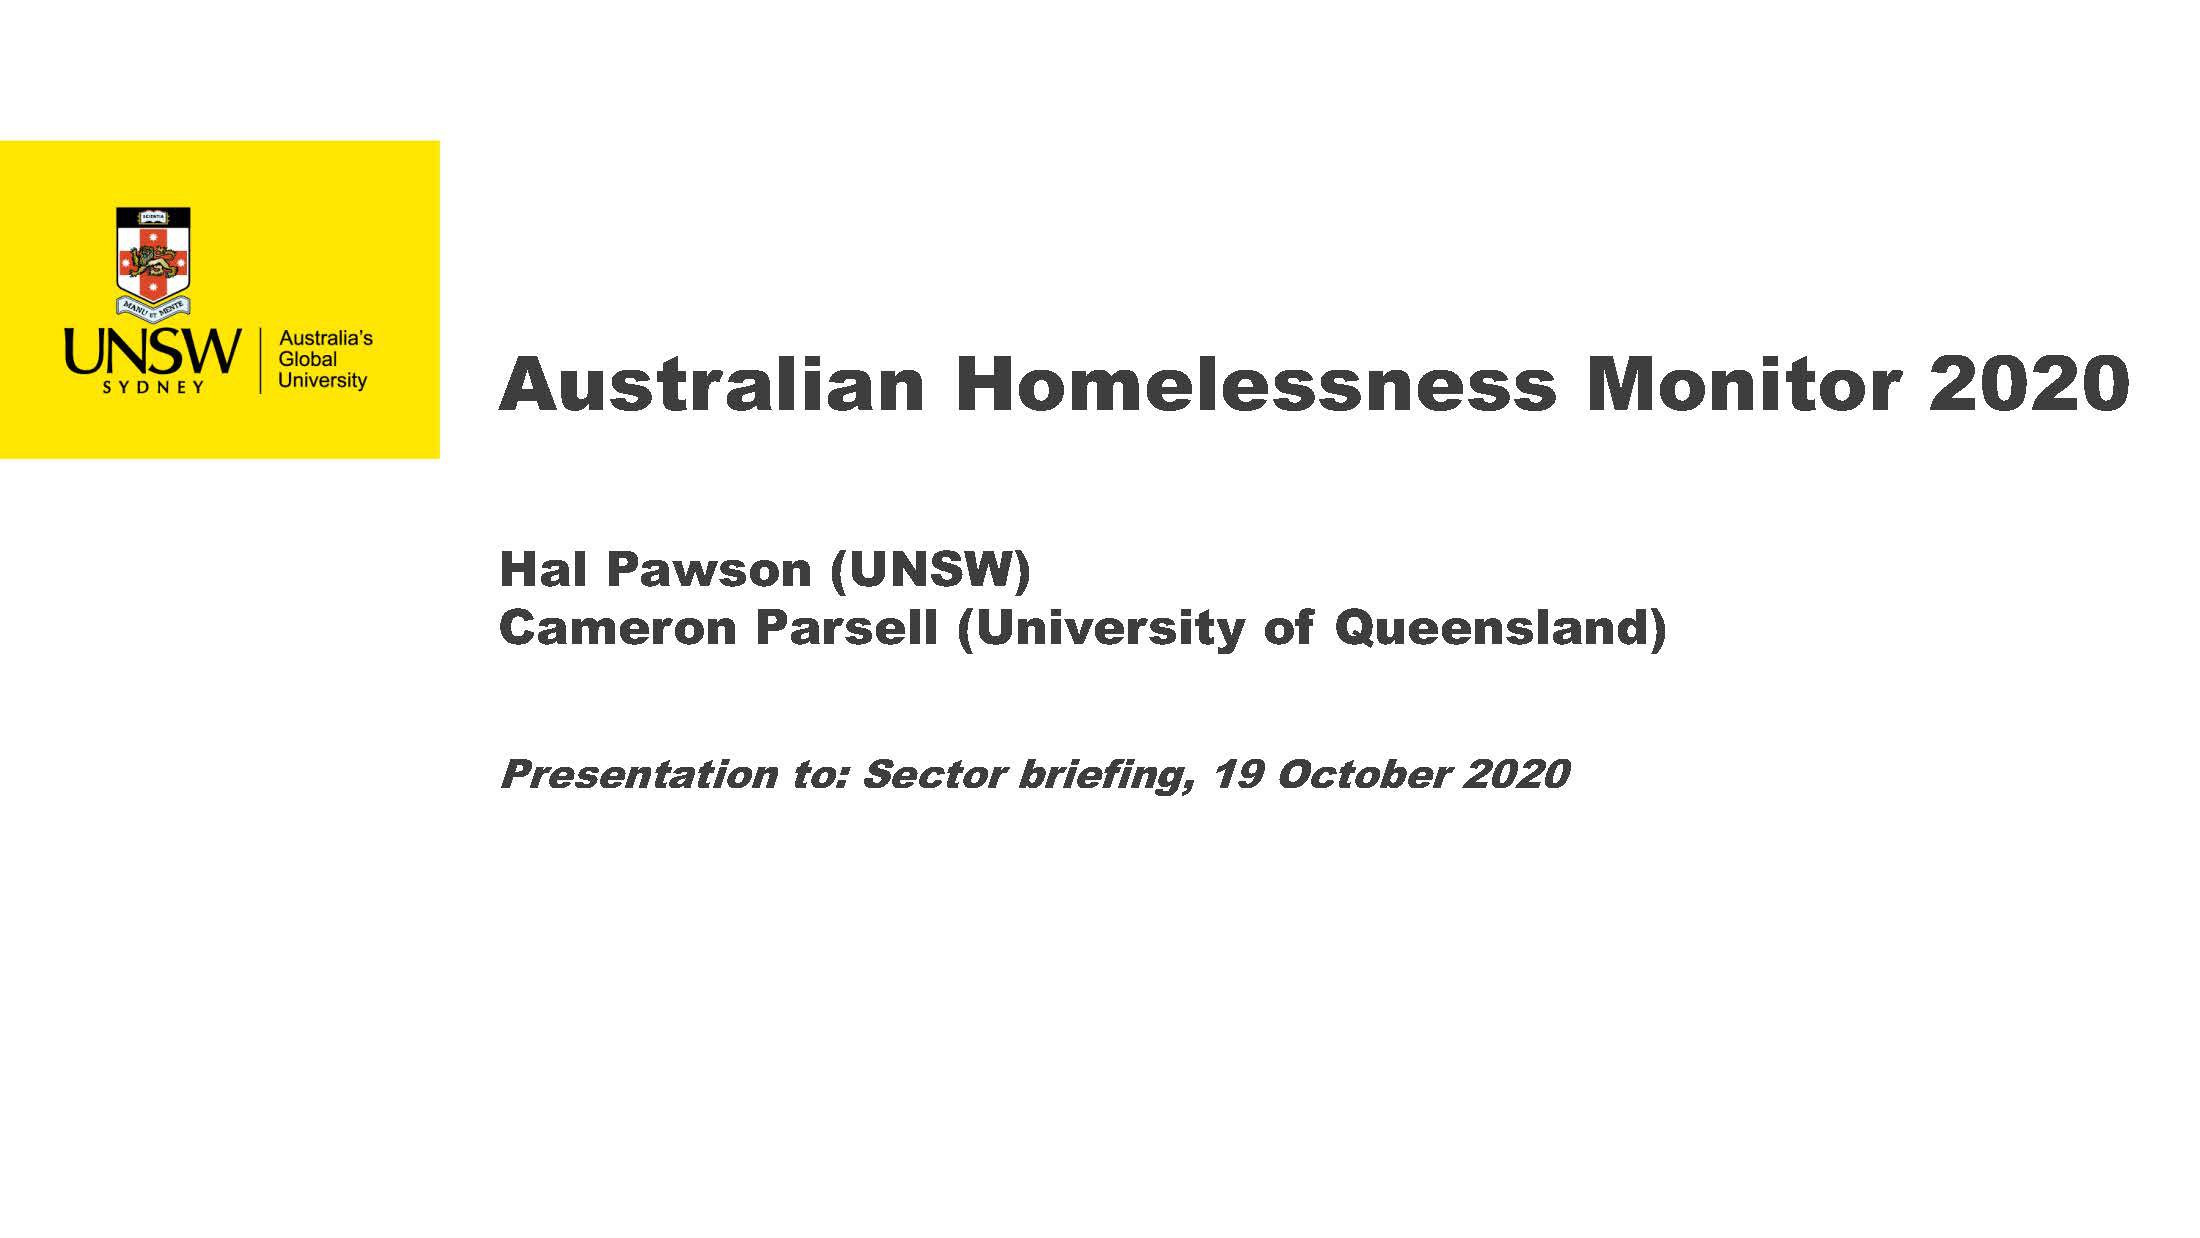  https://cityfutures.be.unsw.edu.au/media/images/Pages_from_AHM_2020_presentation_v4.original.jpg